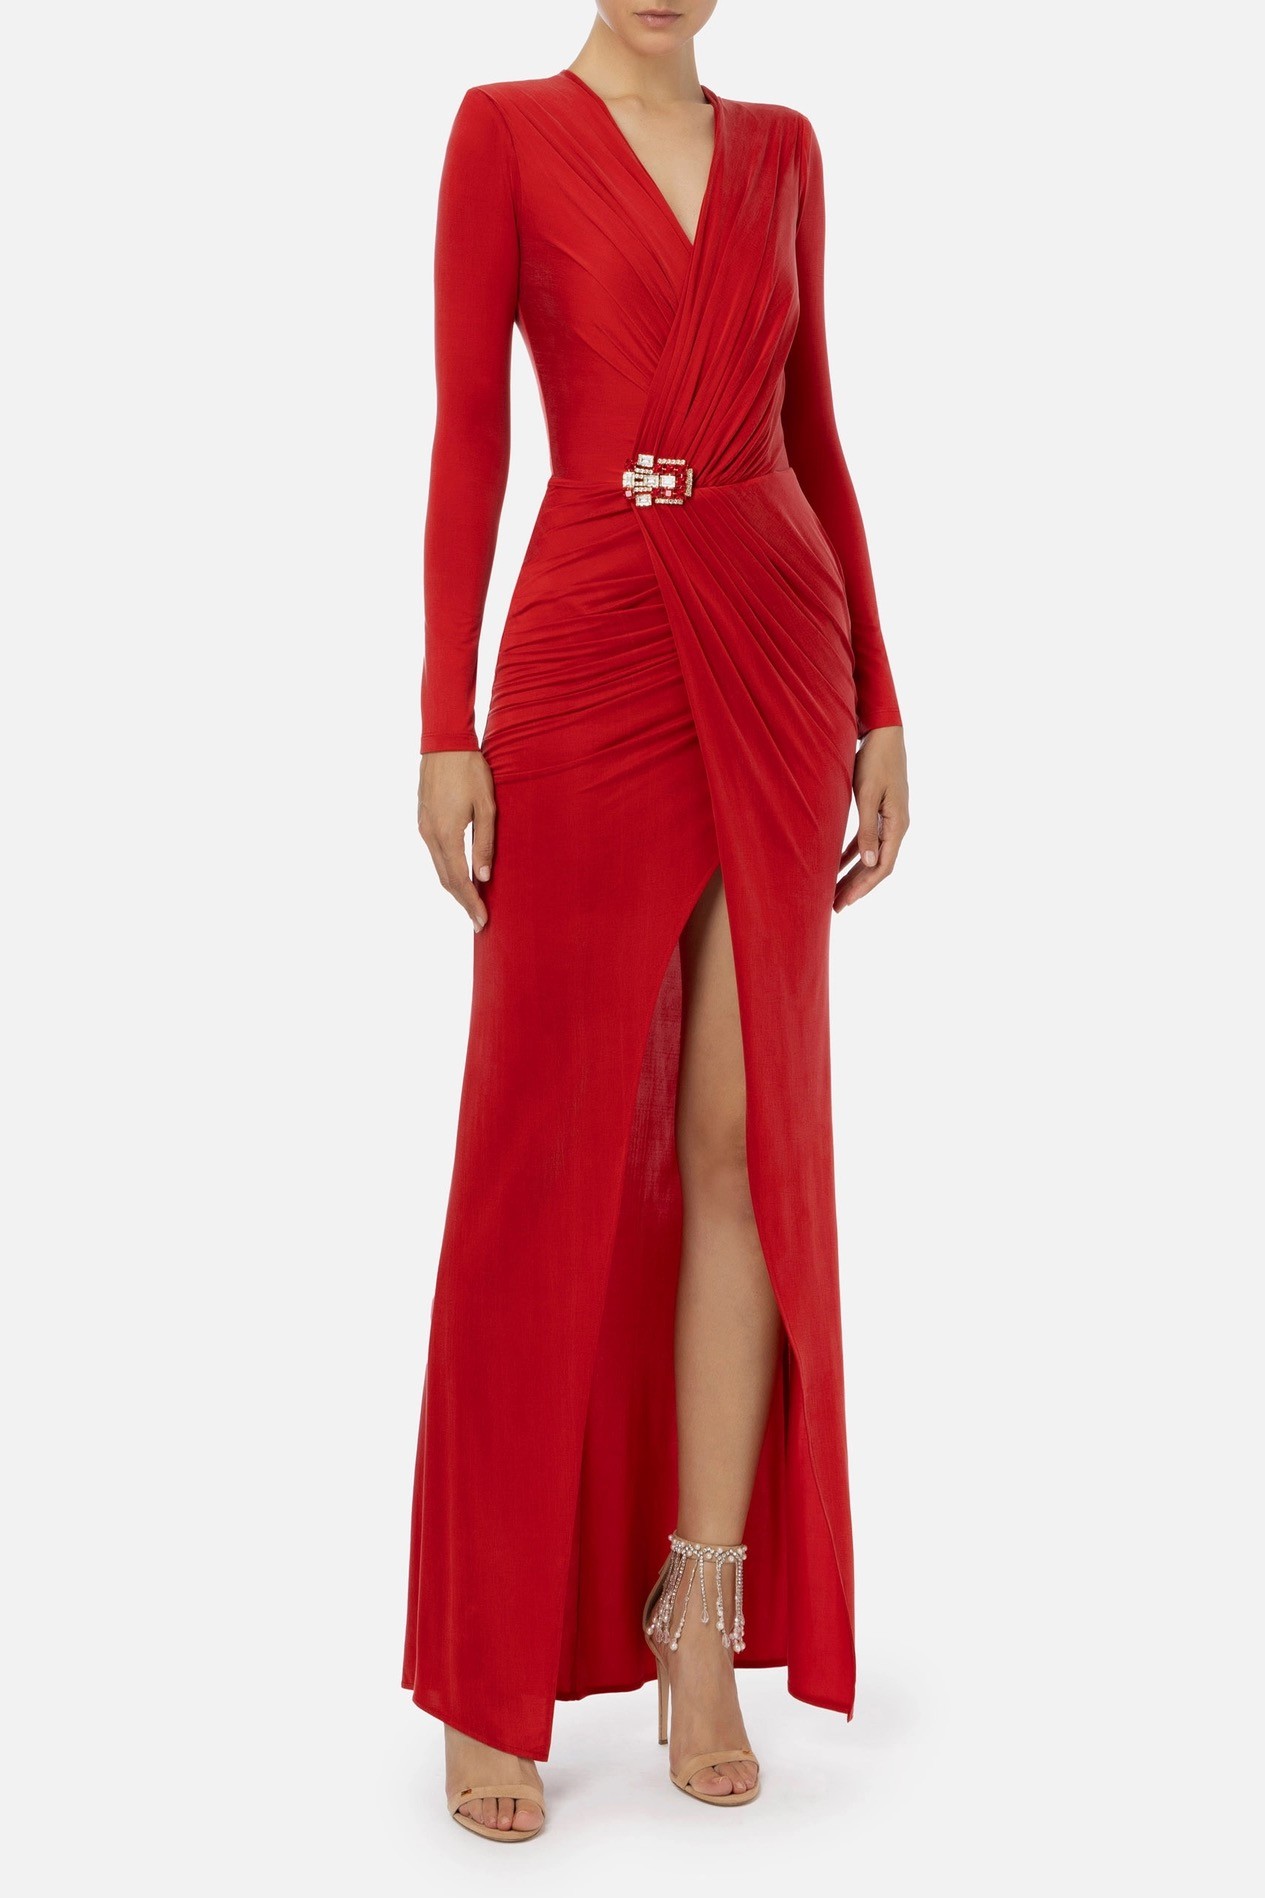 Red Carpet dress in cupro jersey with accessory - red